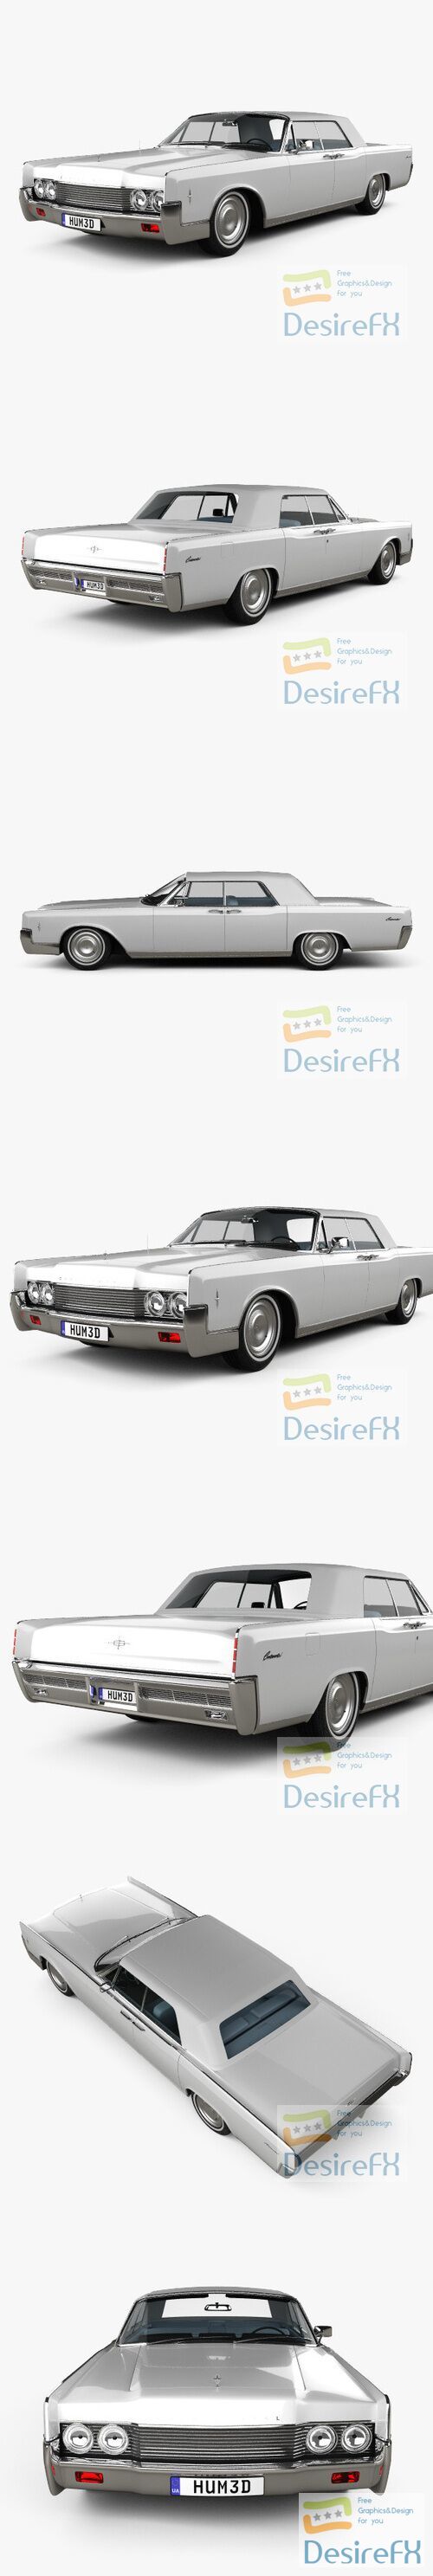 Lincoln Continental convertible 1968 3D Model